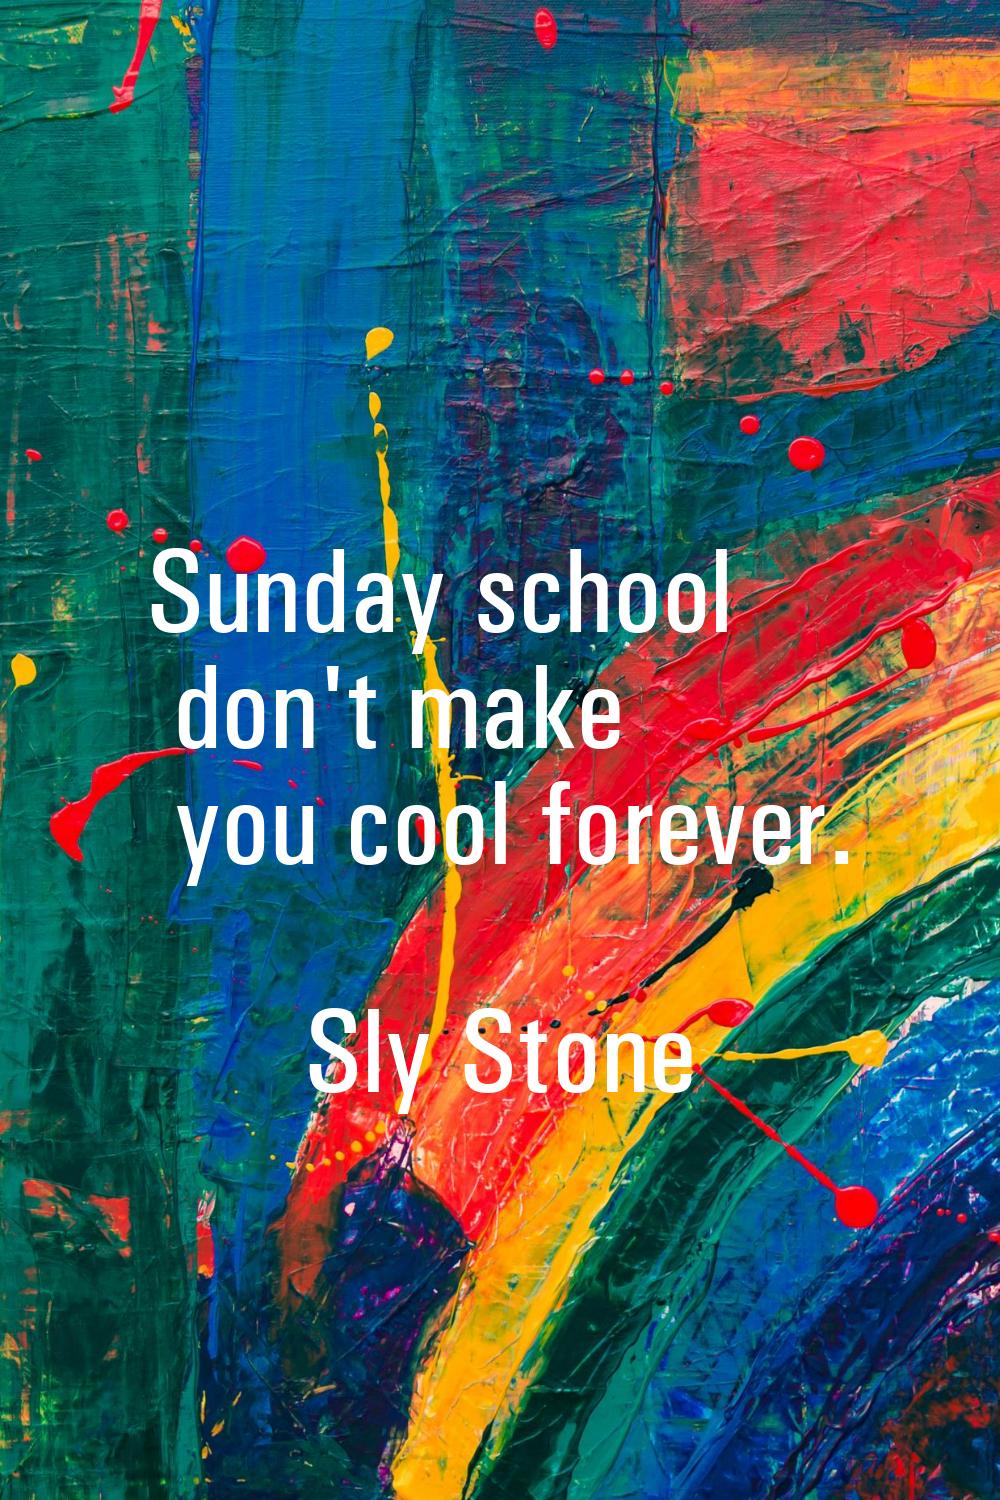 Sunday school don't make you cool forever.